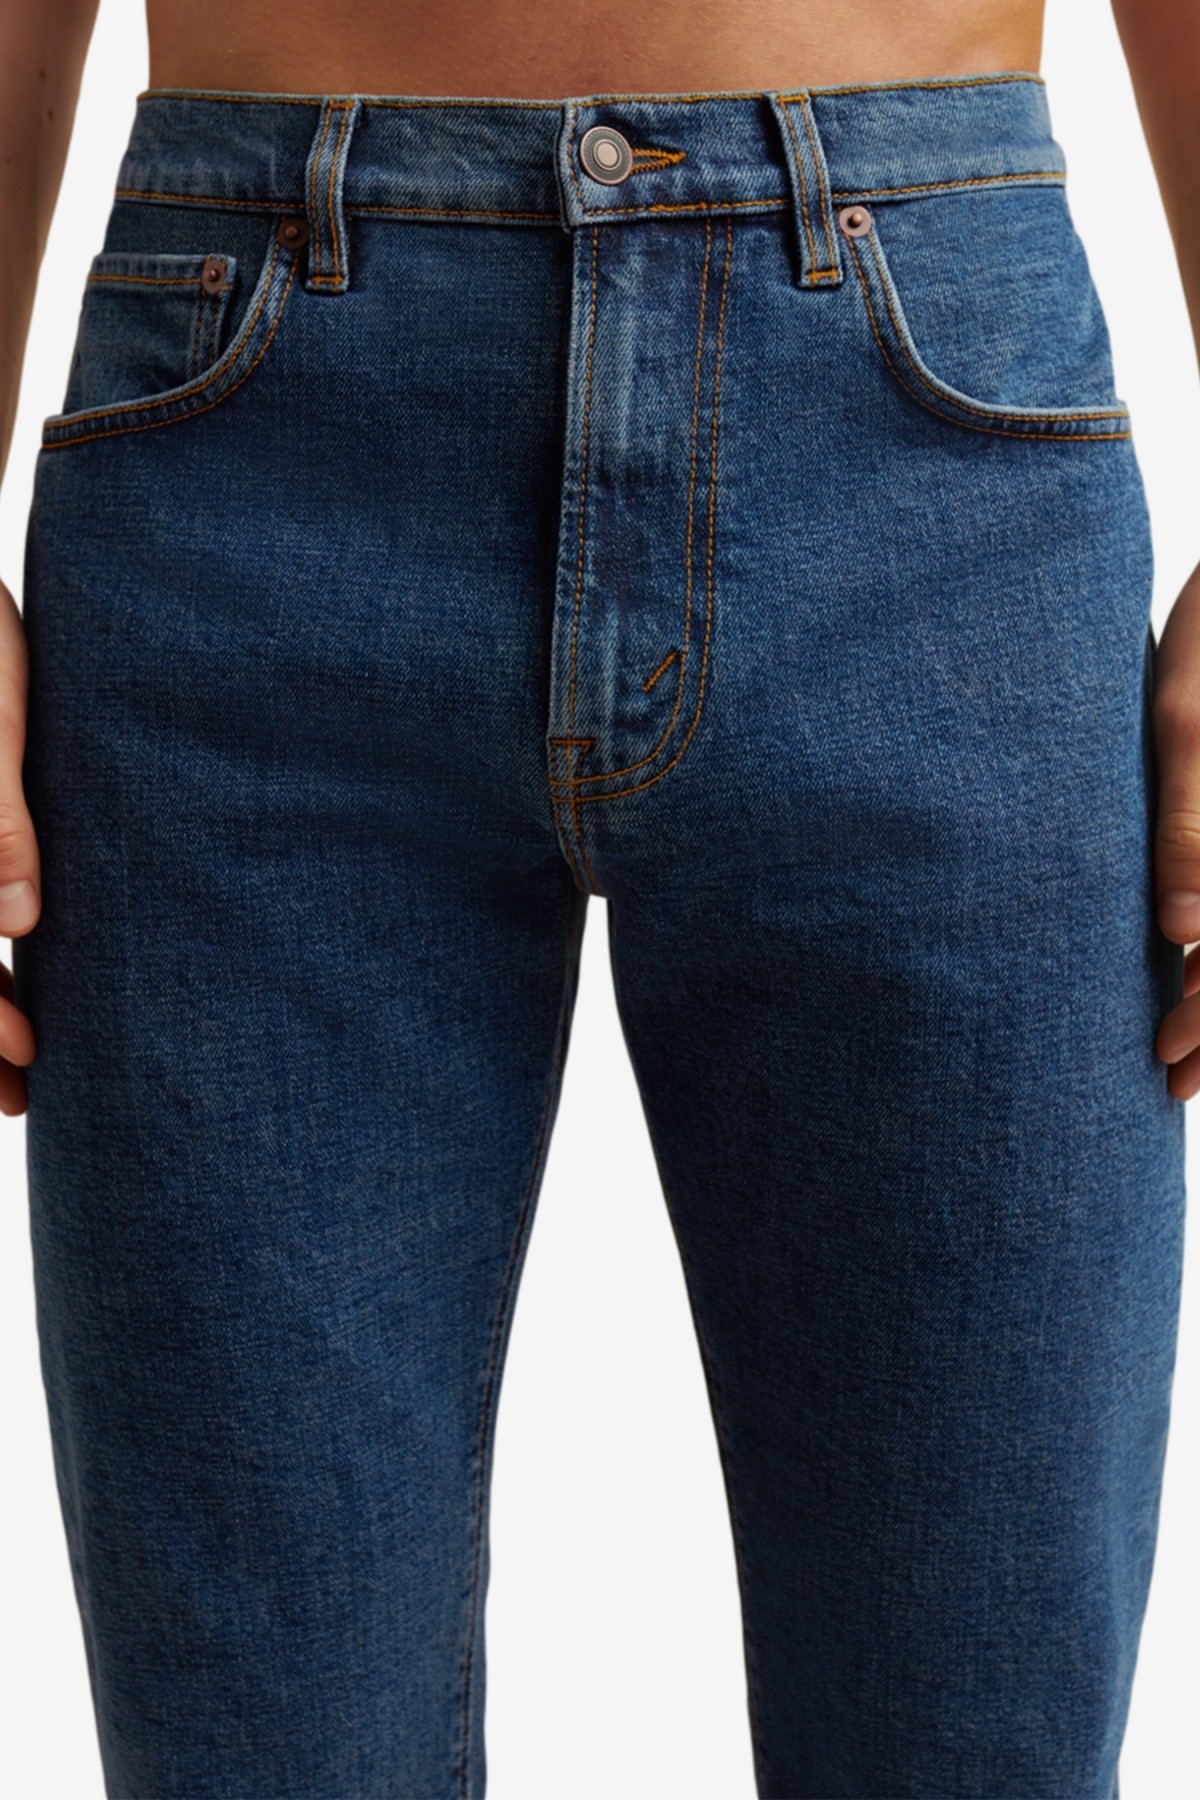 Jeanerica TM005 Tapered Fit in Vintage 95